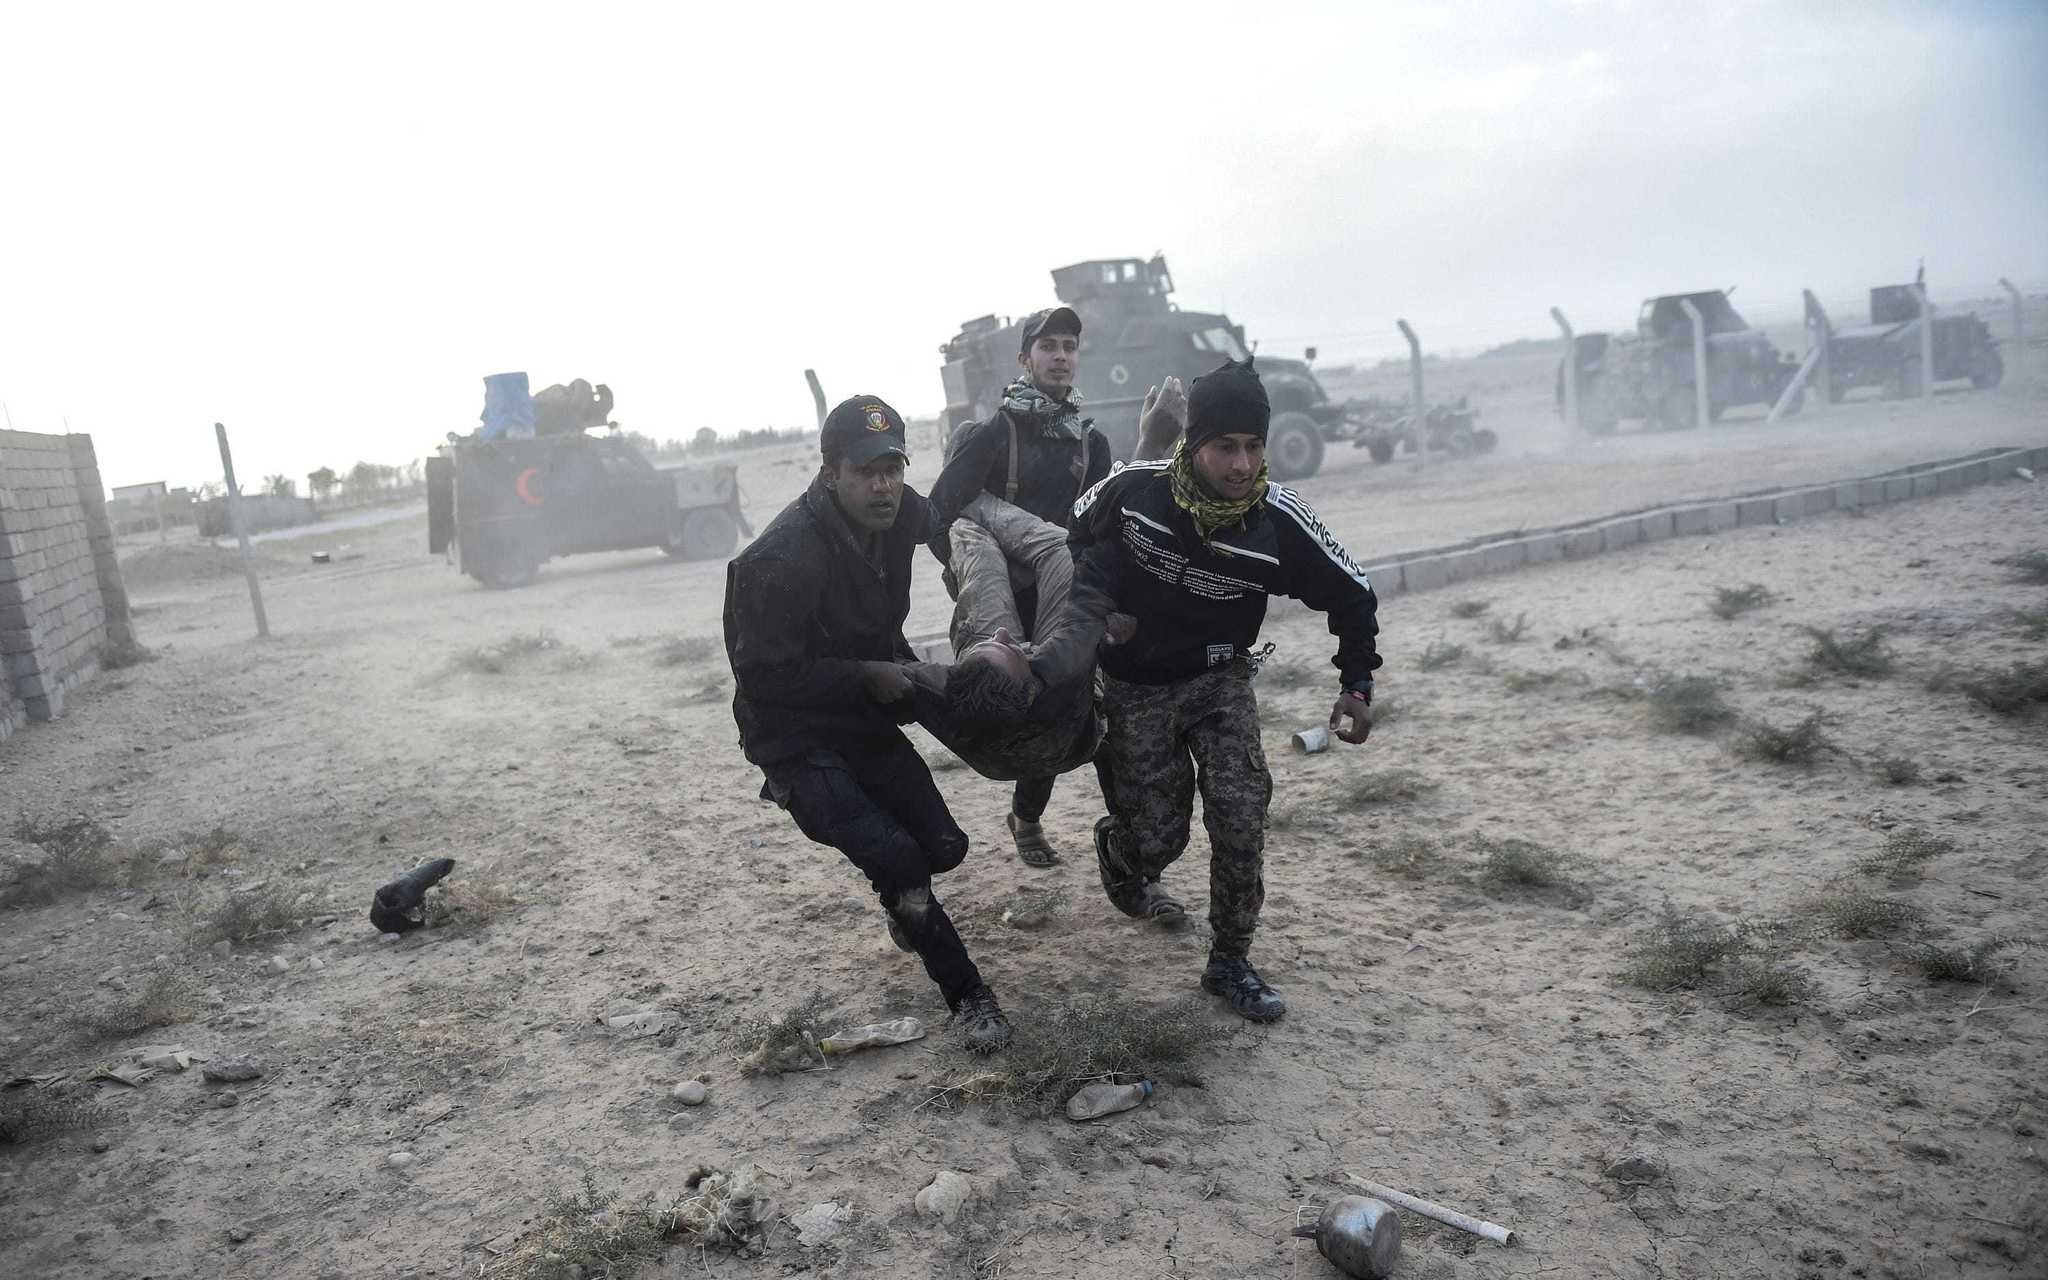 The Iraqi Counter Terrorism Section (CTS) members carry an injured comrade during clashes with Daesh near the village of Bazwaya, on the eastern edges of Mosul, on Oct 31.